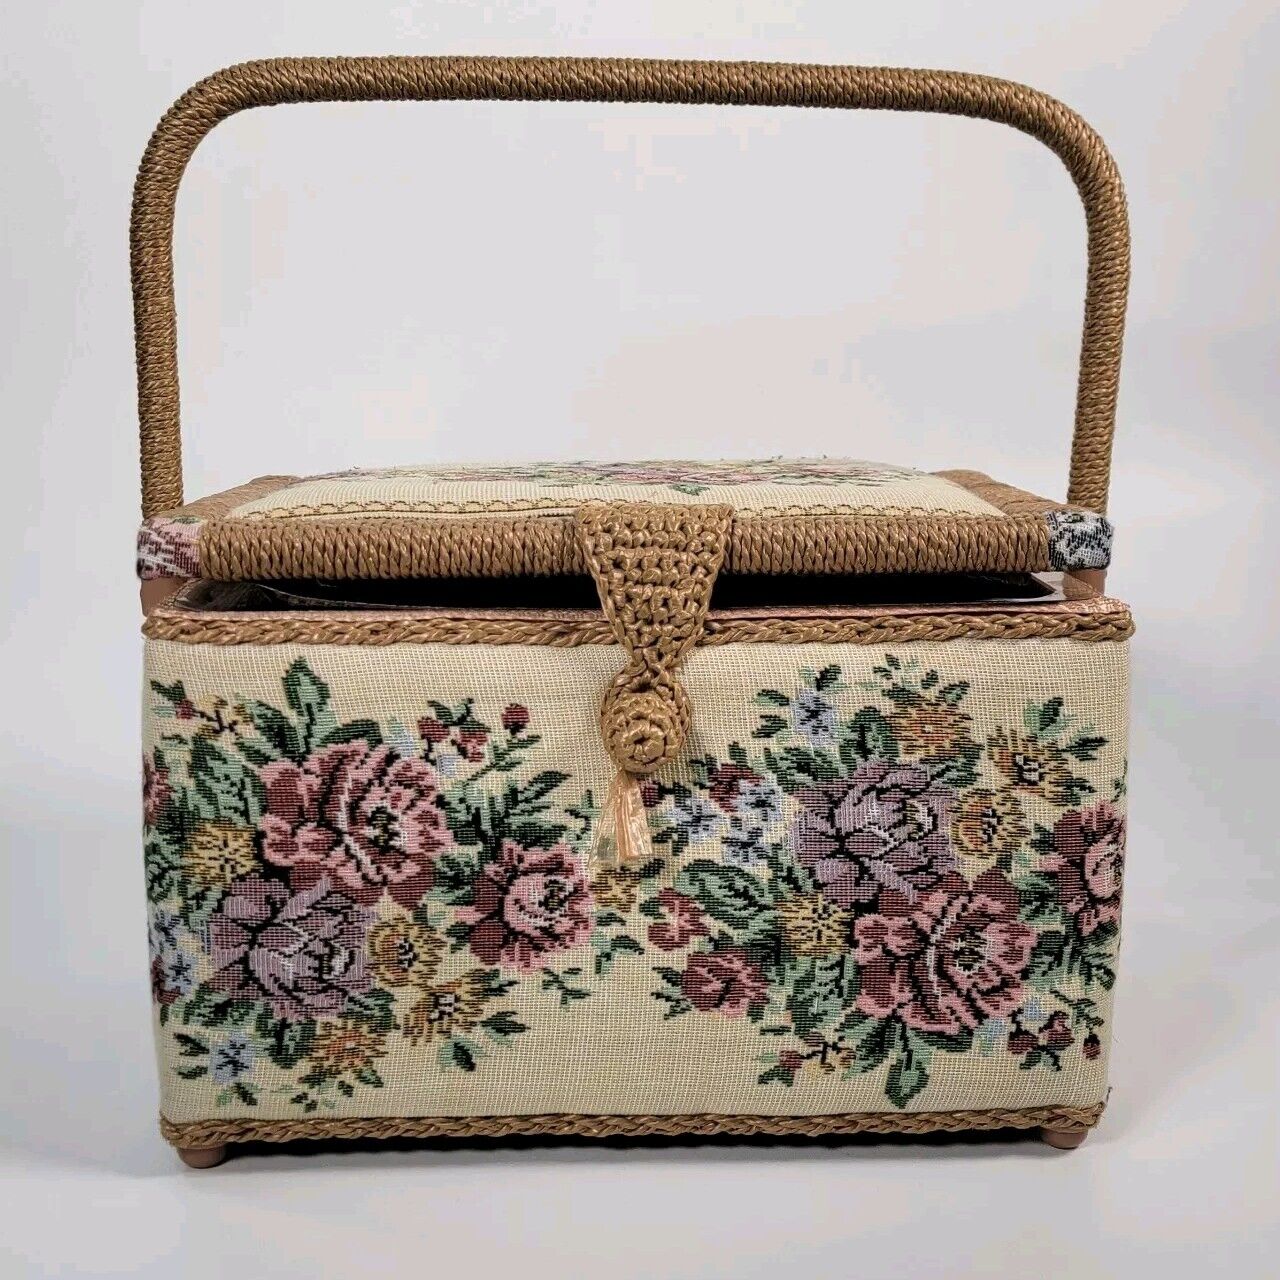 Vintage AZAR Basket Weave Sewing Craft Box with Beads, Thread, Patches 11\